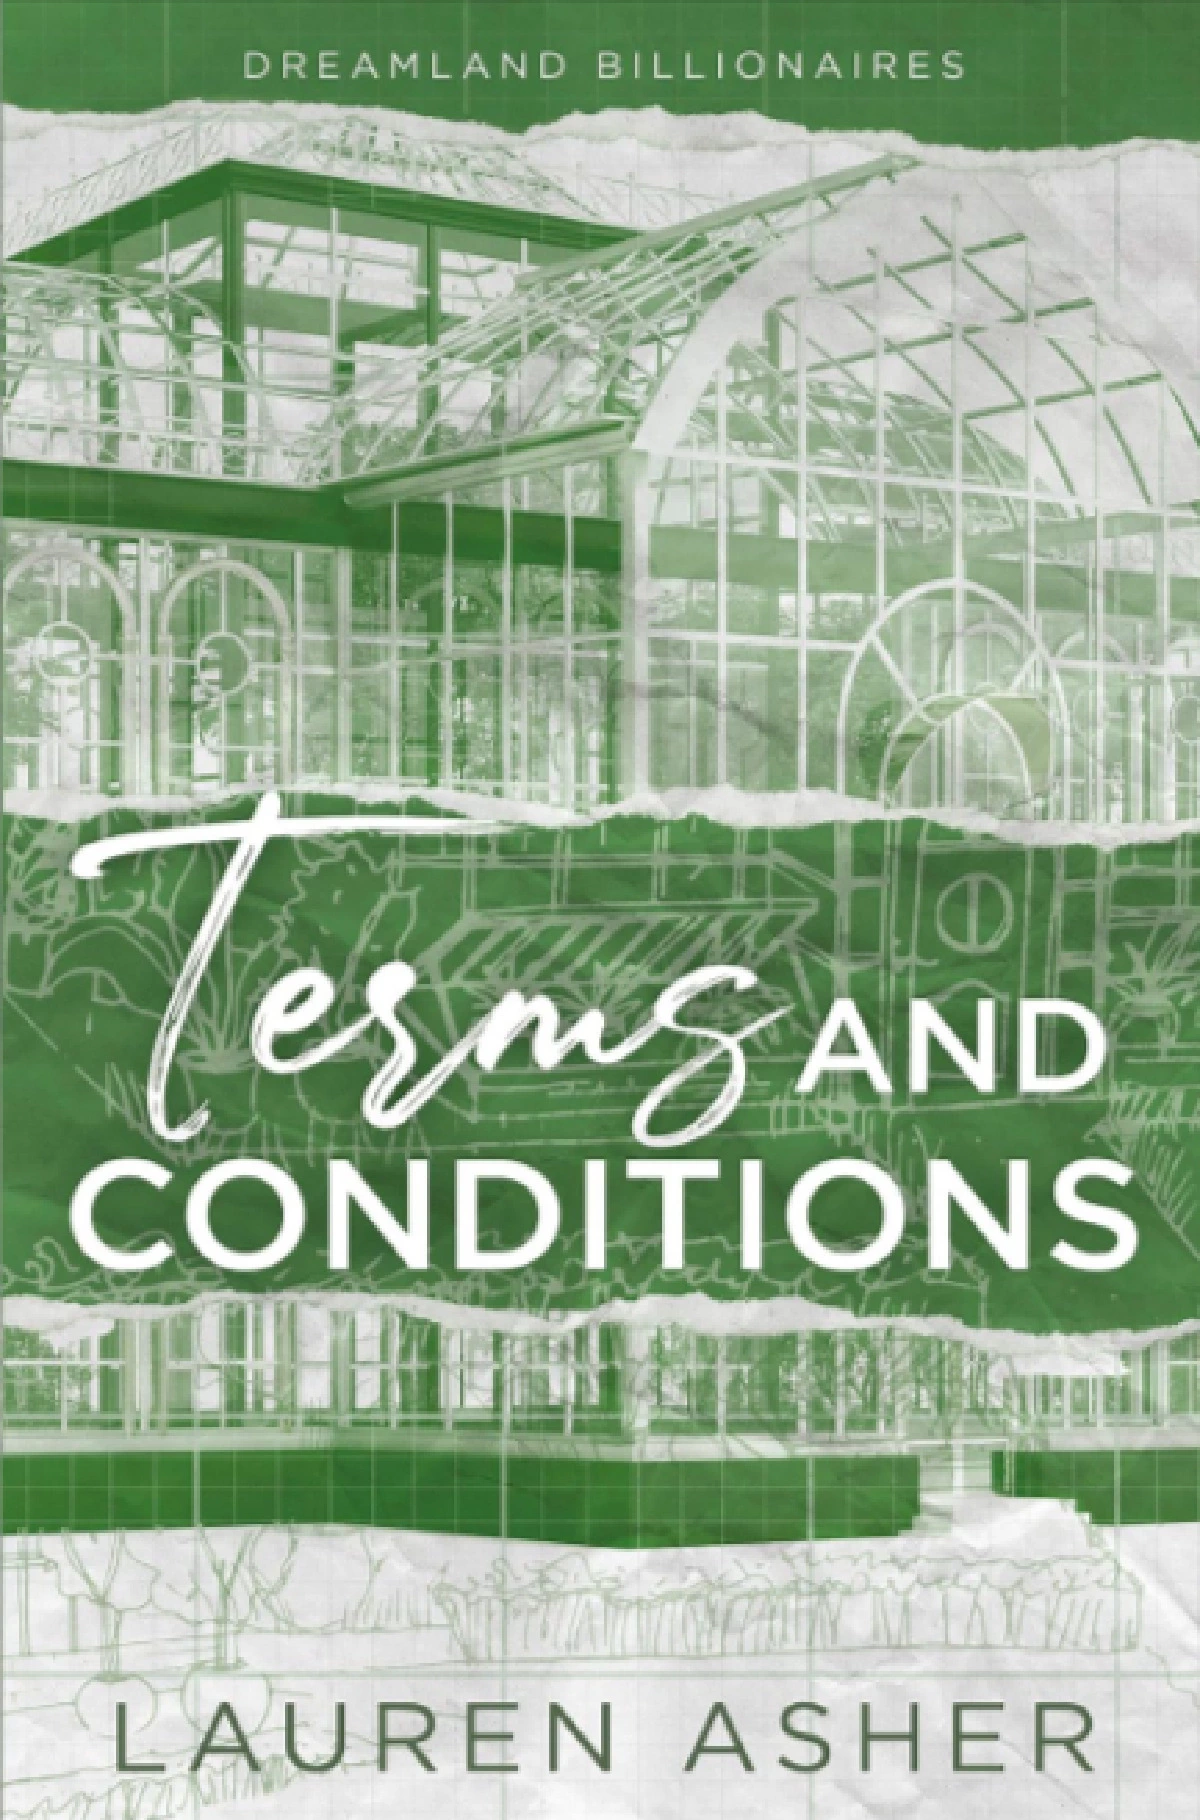 Terms and Conditions Book